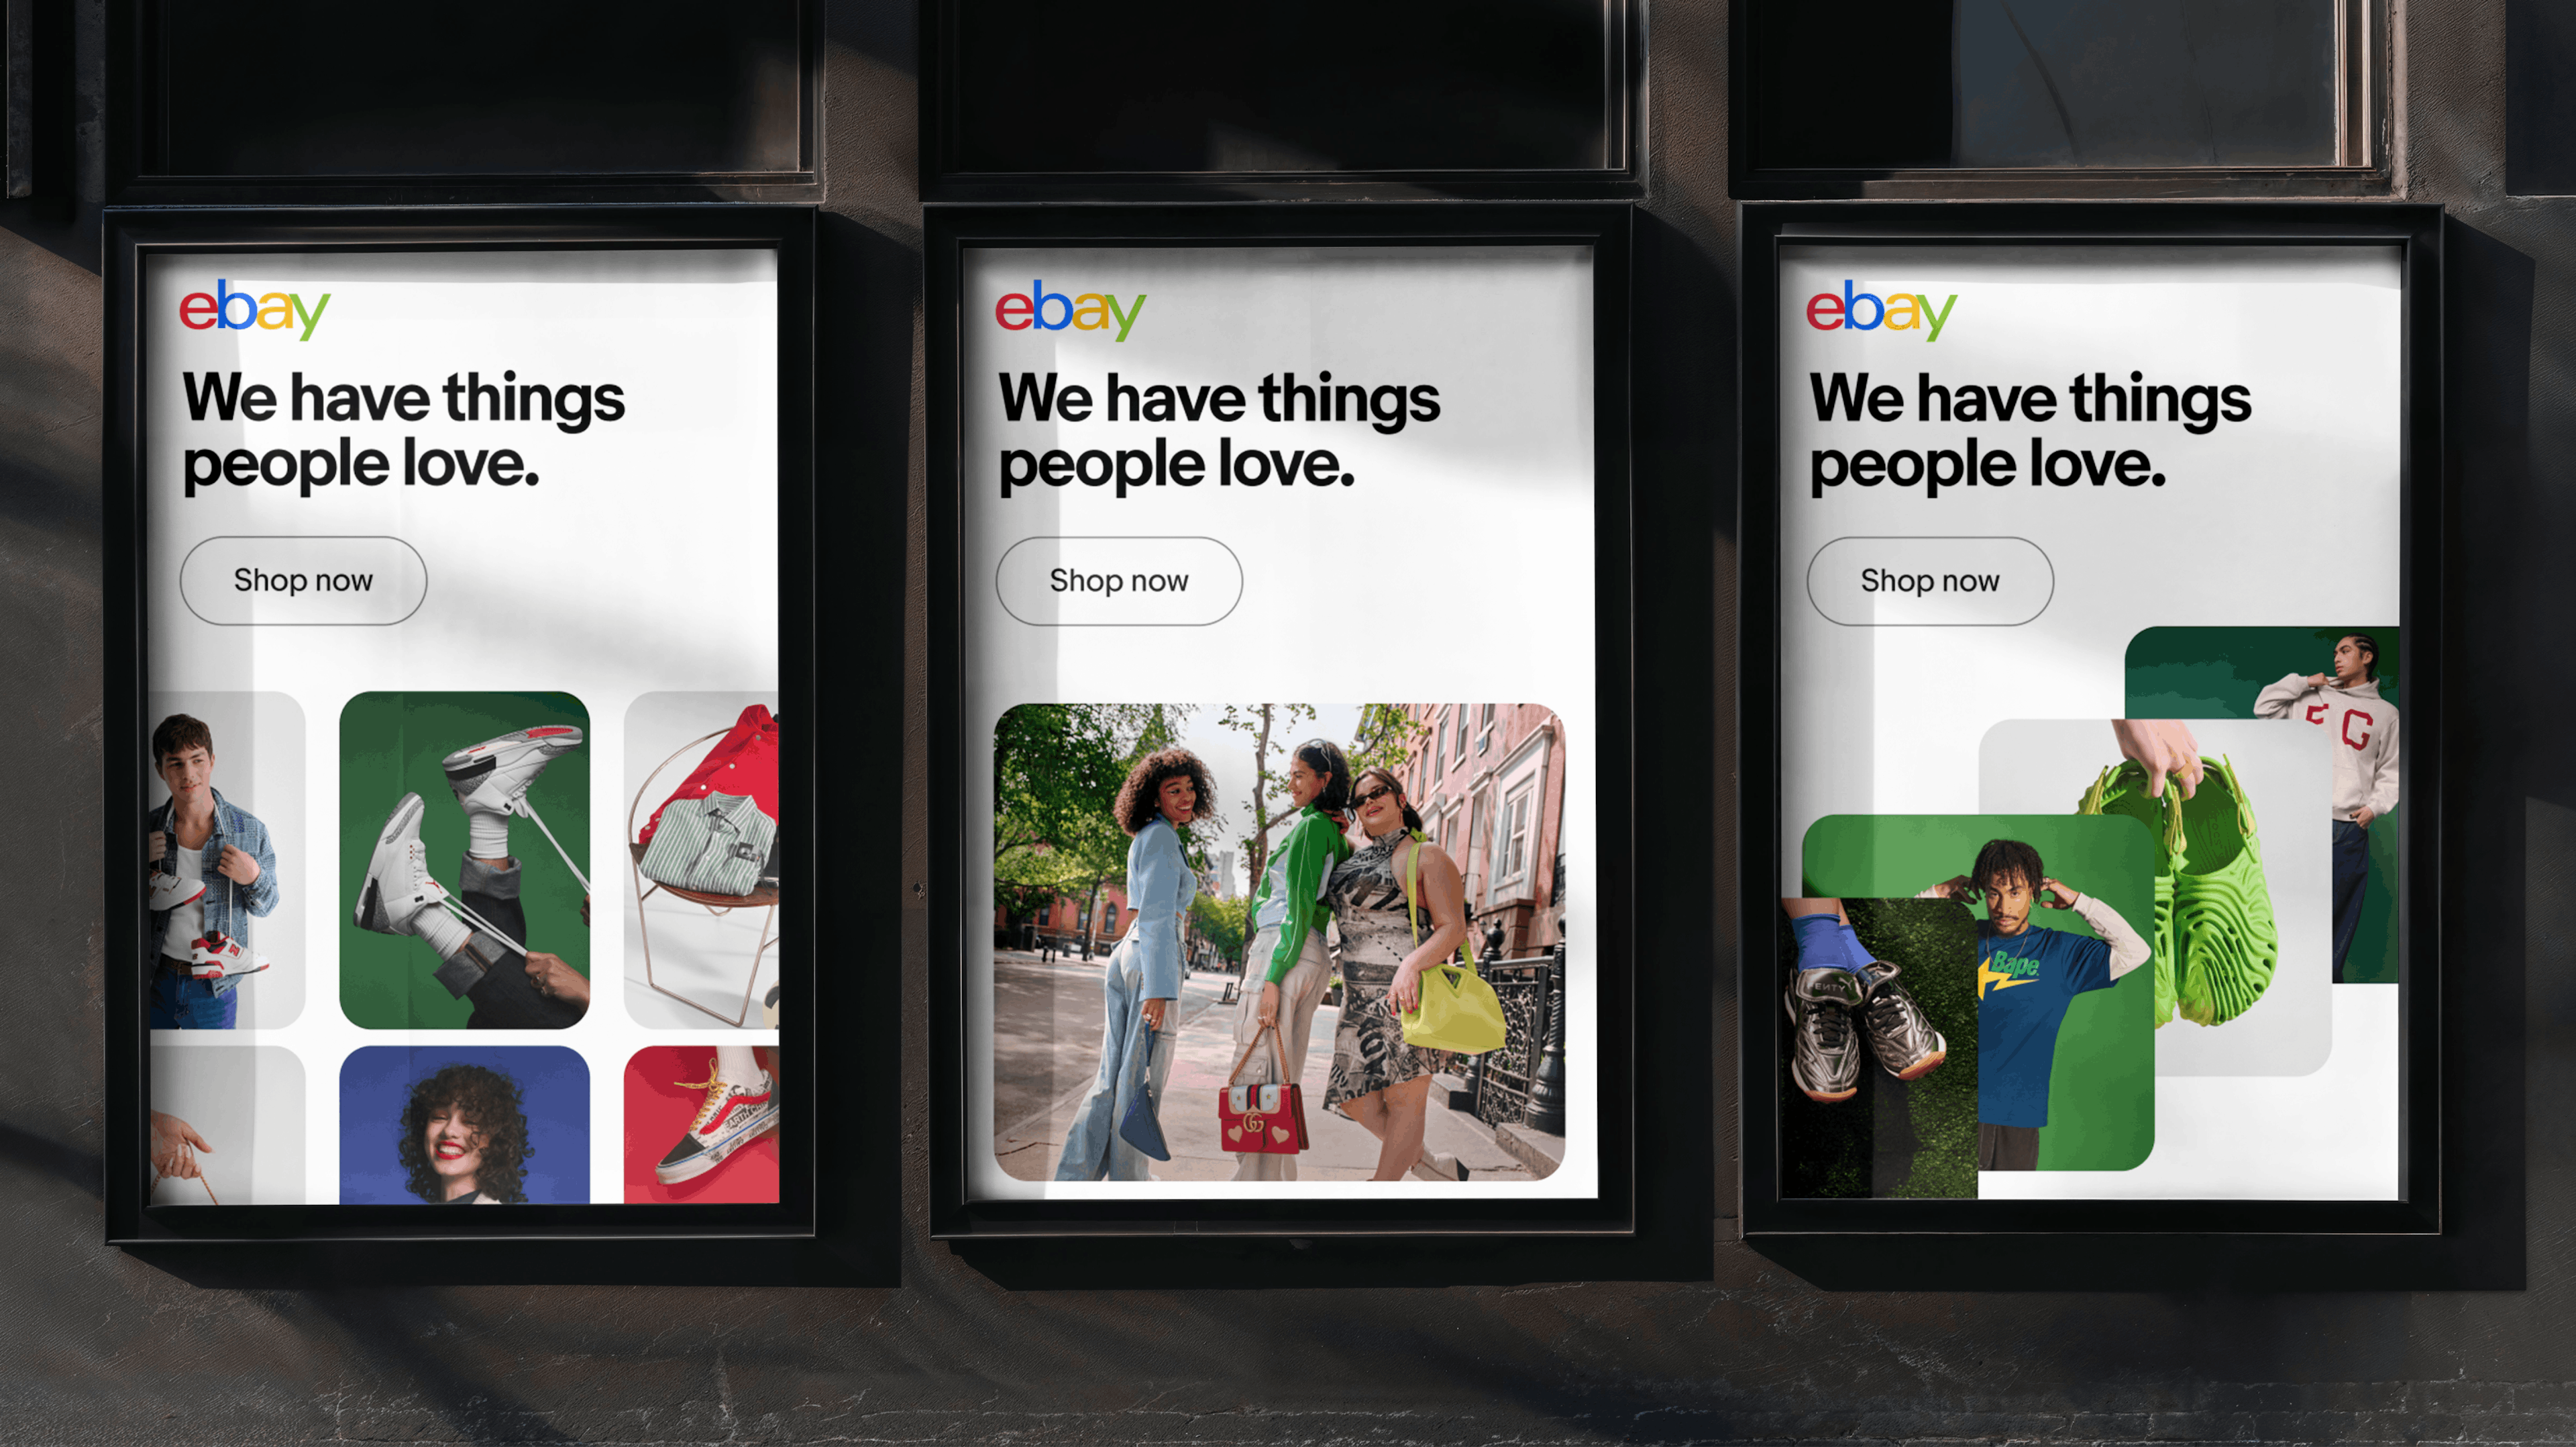 A series of posters on the side of a building. They all have different fashion related imagery of sneakers, tops, and bags with "We have things people love." as the headline.